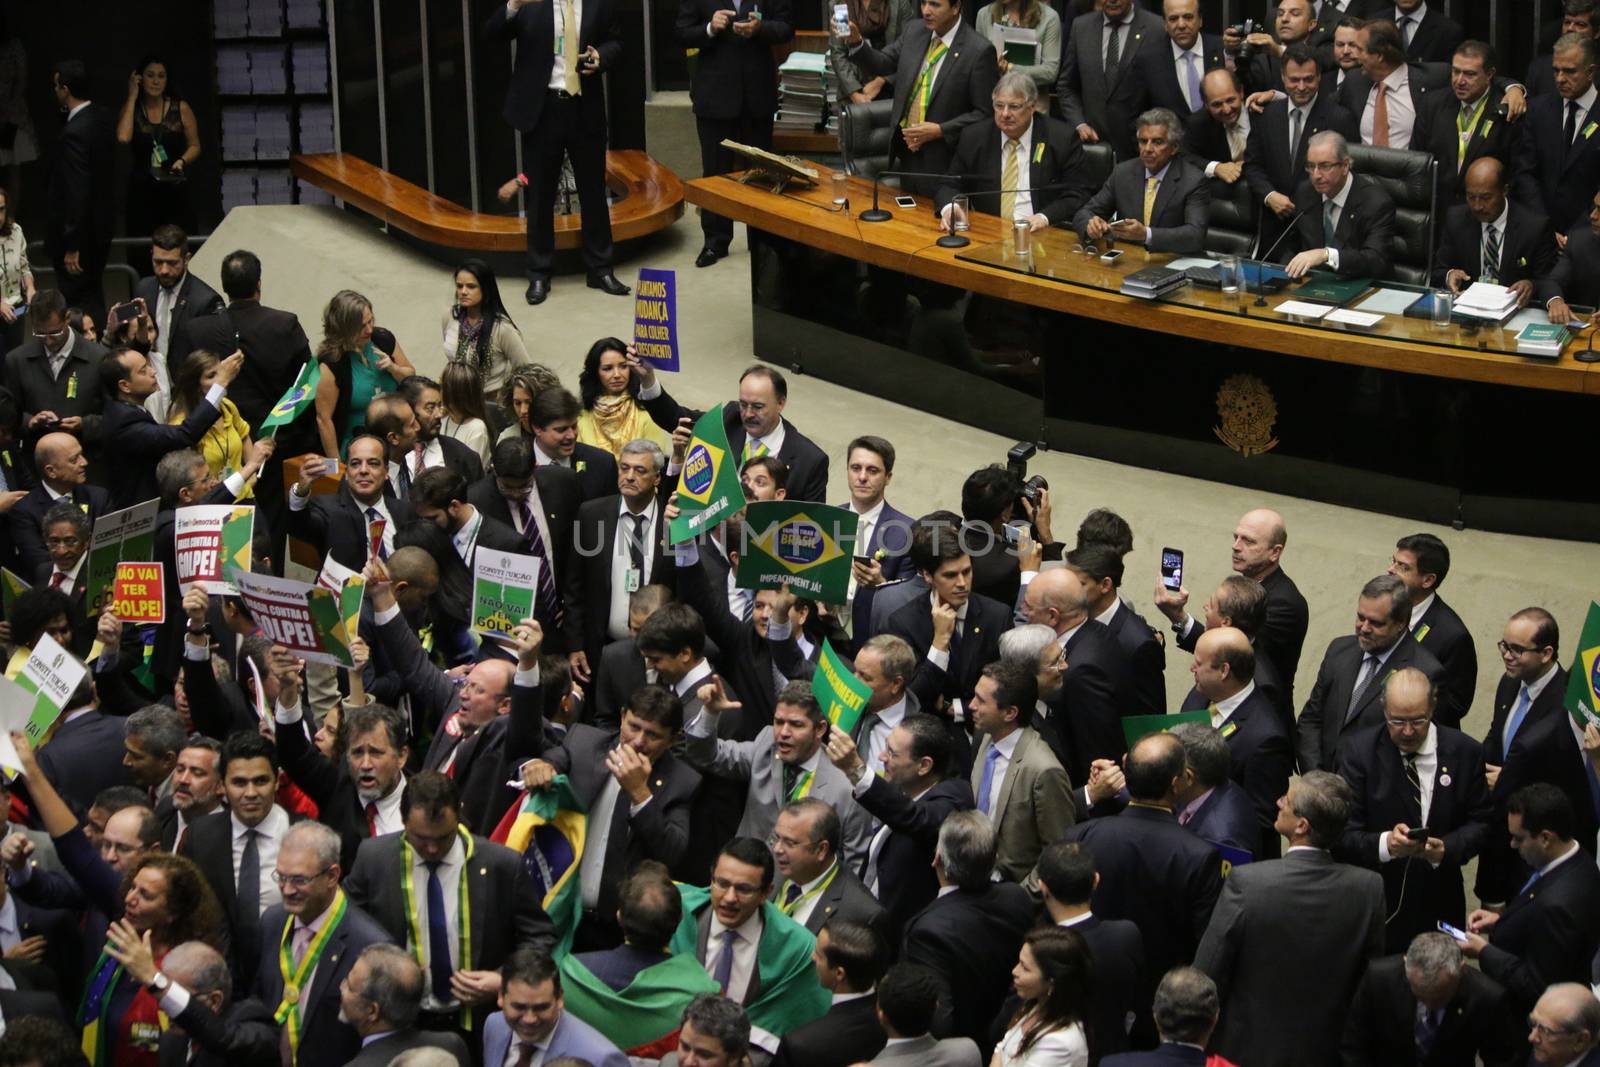 BRAZIL, Brasilia: Members of parliament began impeachment proceedings for President Dilma Rousseff on April 17, 2016 in Brasilia. Some members of parliament began signing, shouting and throwing confetti as the proceedings turned chaotic. The impeachment issue has divided Brazil over the past few weeks with some in support of impeaching Rousseff, while others are strongly opposed. Brazil's lower house is voting on whether to continue impeachment proceedings. 342 out of 513 votes are needed to continue the proceedings to the upper house.